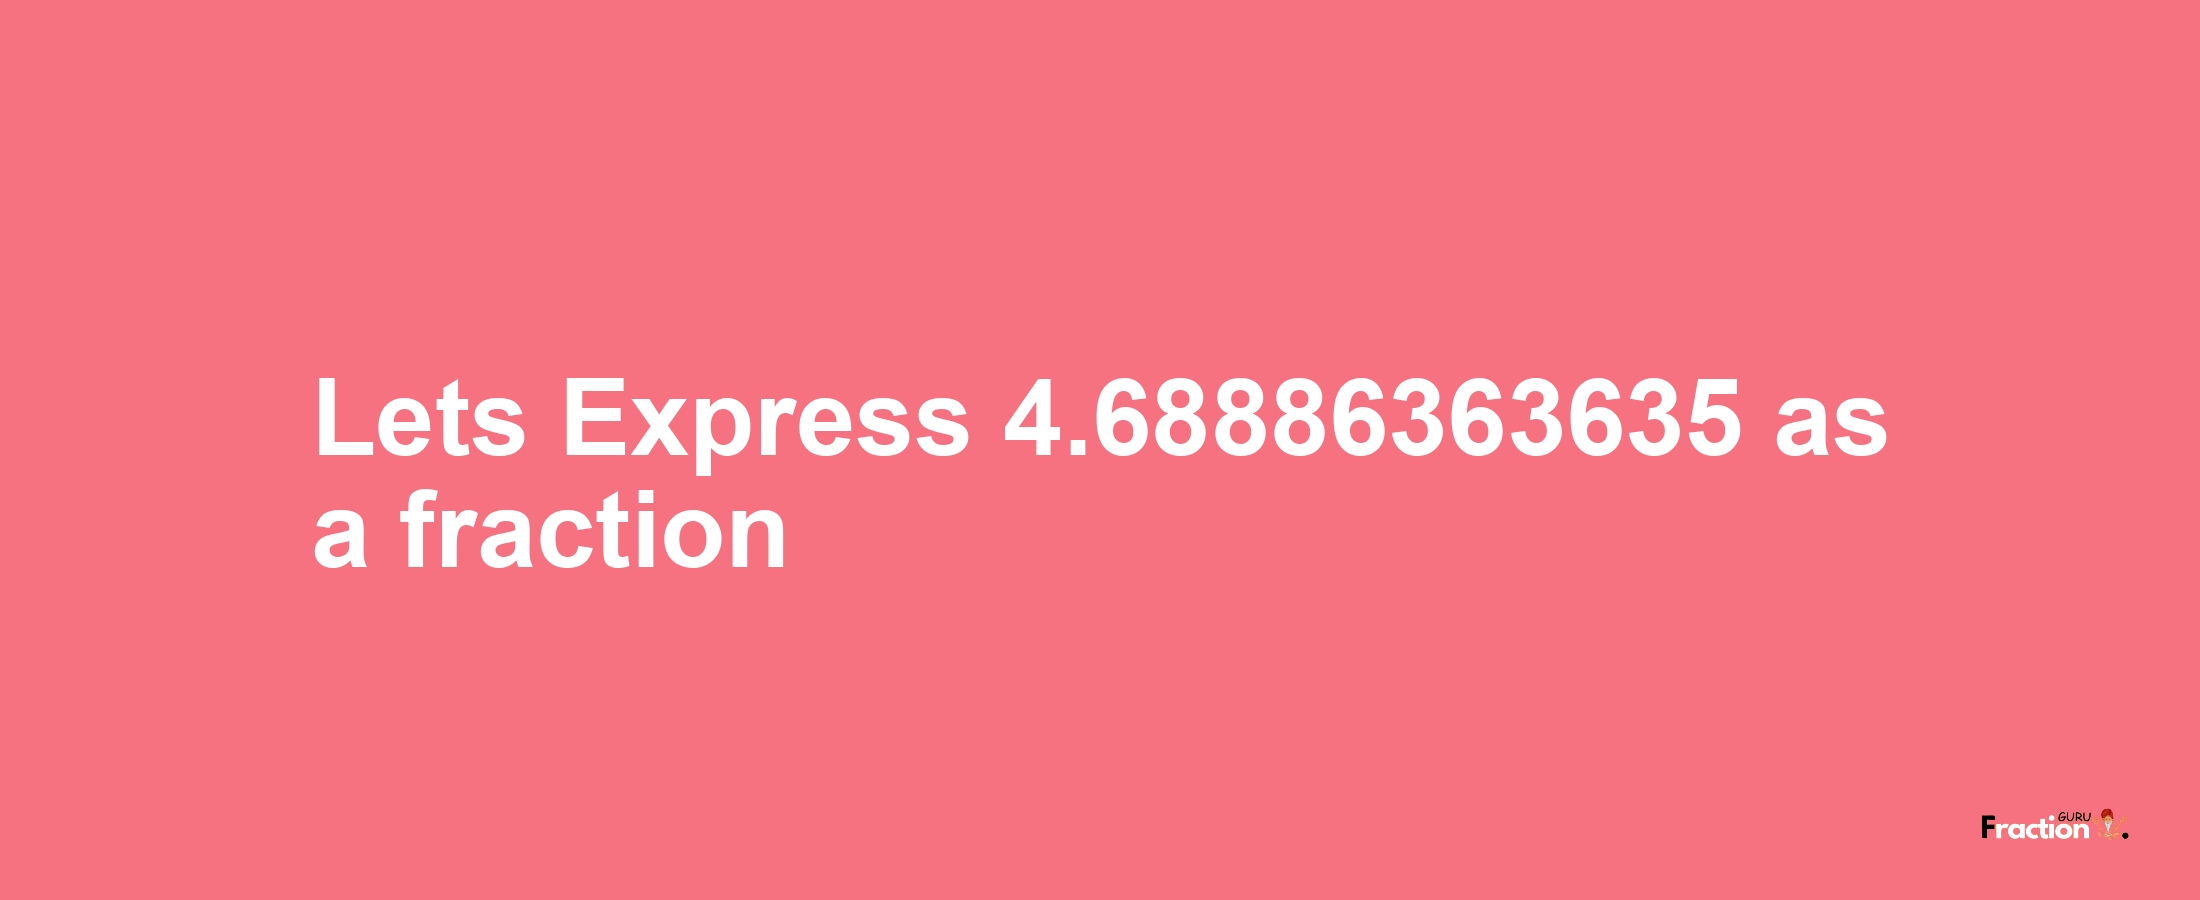 Lets Express 4.68886363635 as afraction